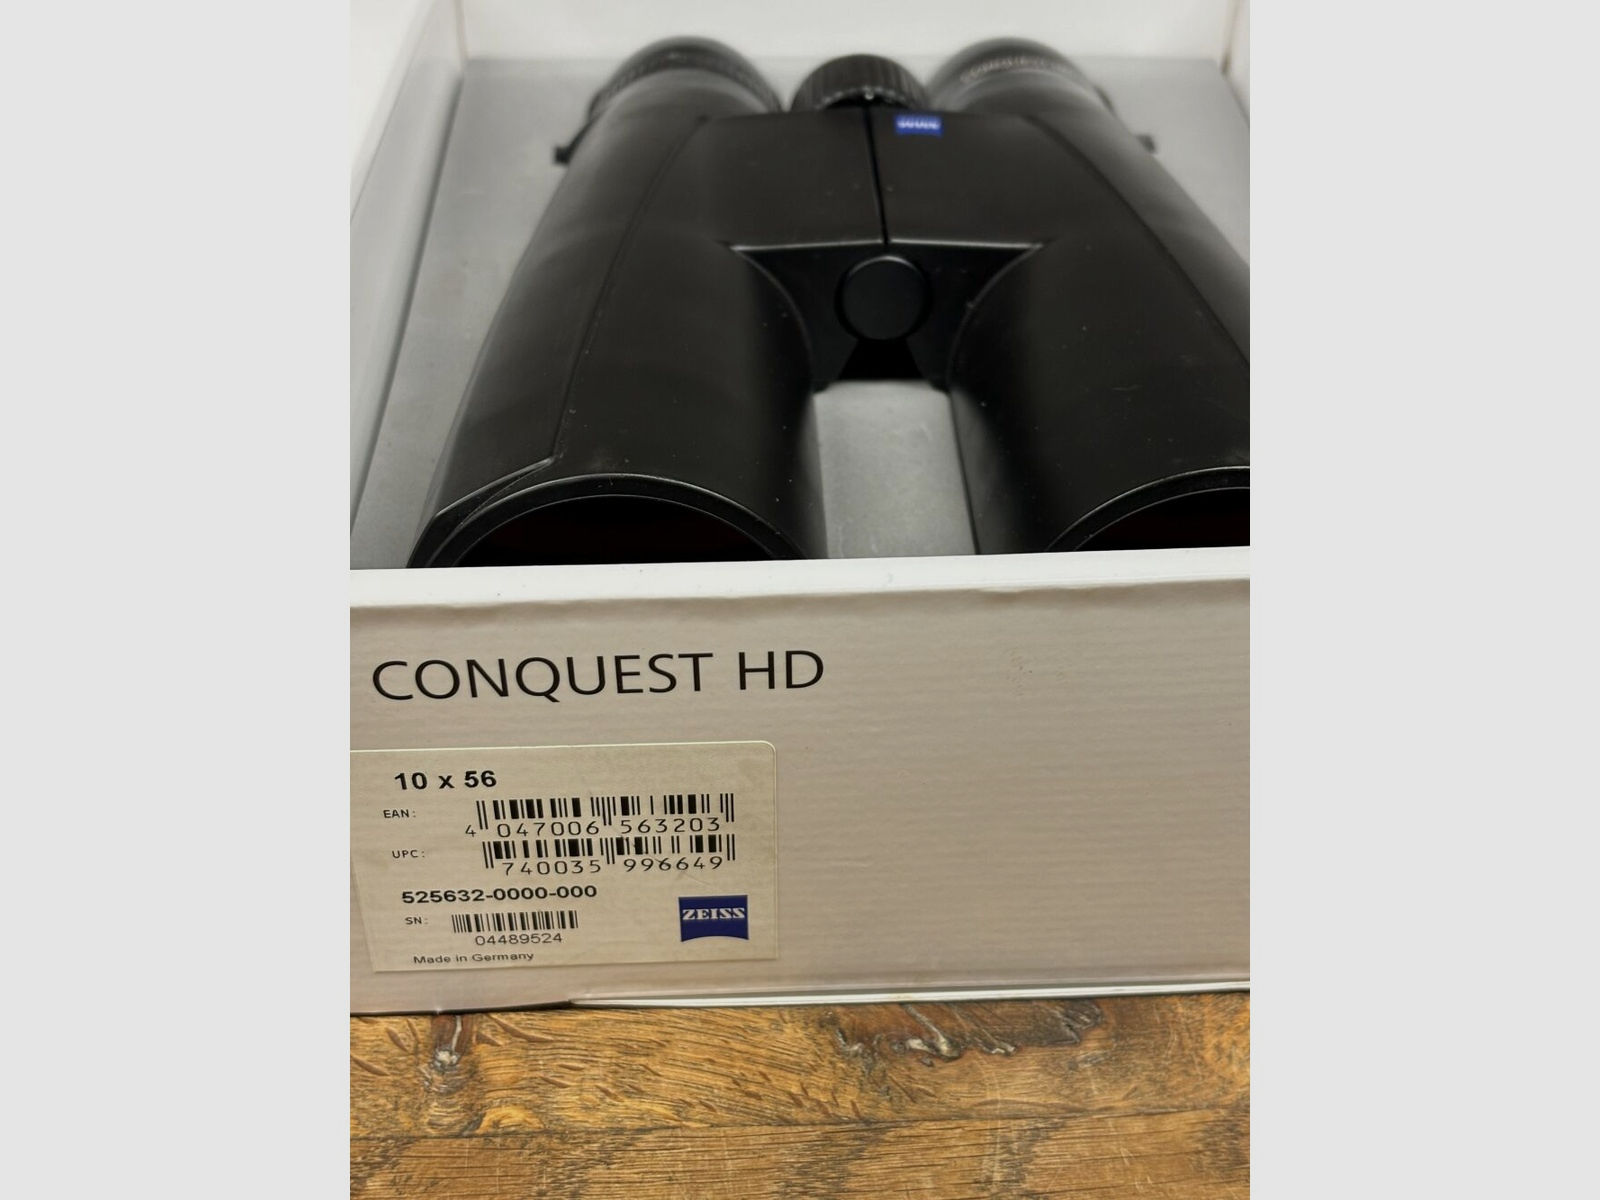 zeiss	 Conquest 10x56